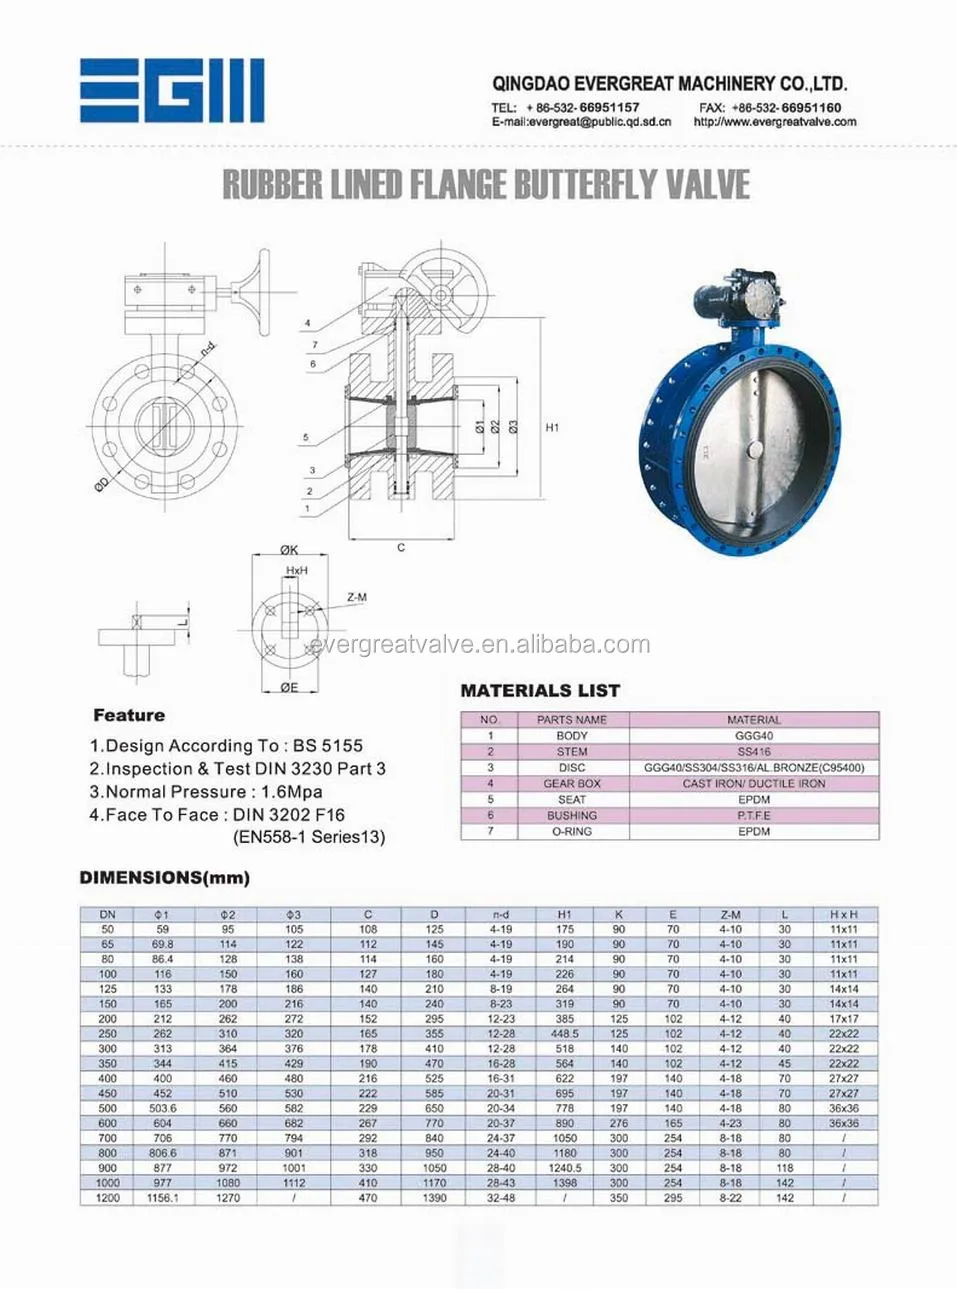 Rubber Lined Flanged Butterfly Valve, PN16, View BUTTERFLY VALVE